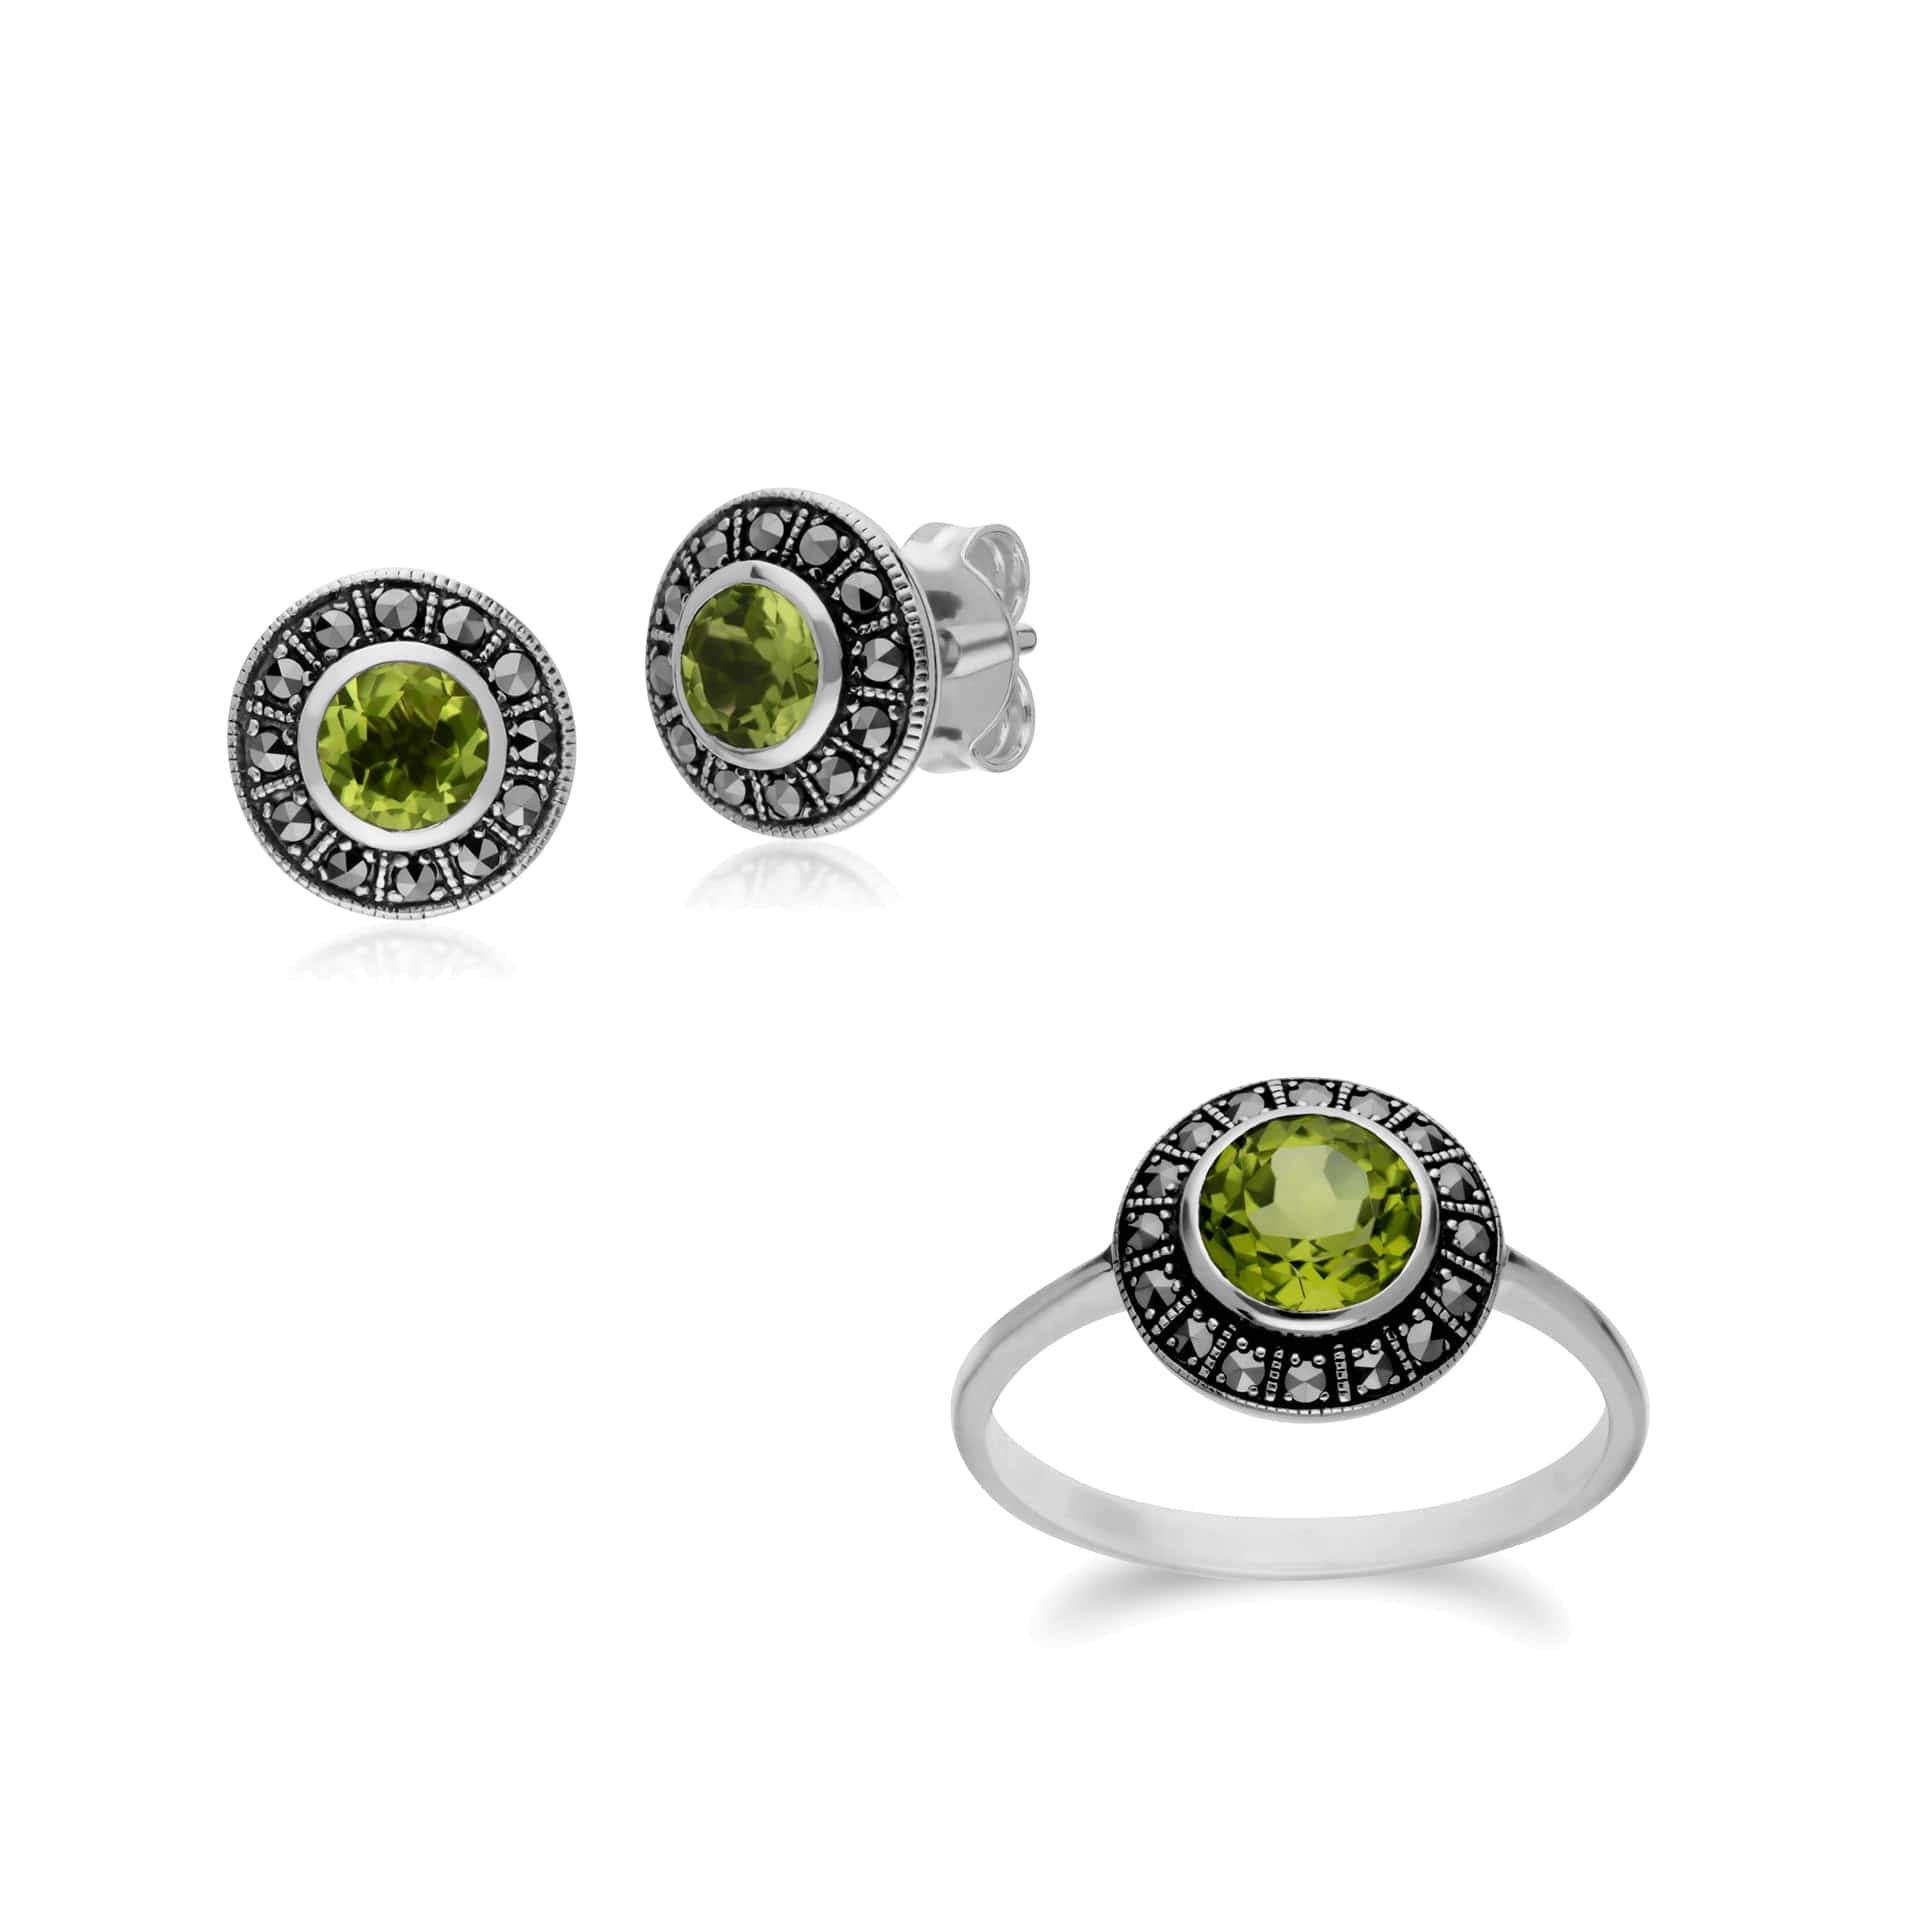 214E872704925-214R605604925 Art Deco Style Round Peridot and Marcasite Cluster Stud Earrings & Ring Set in 925 Sterling Silver 1